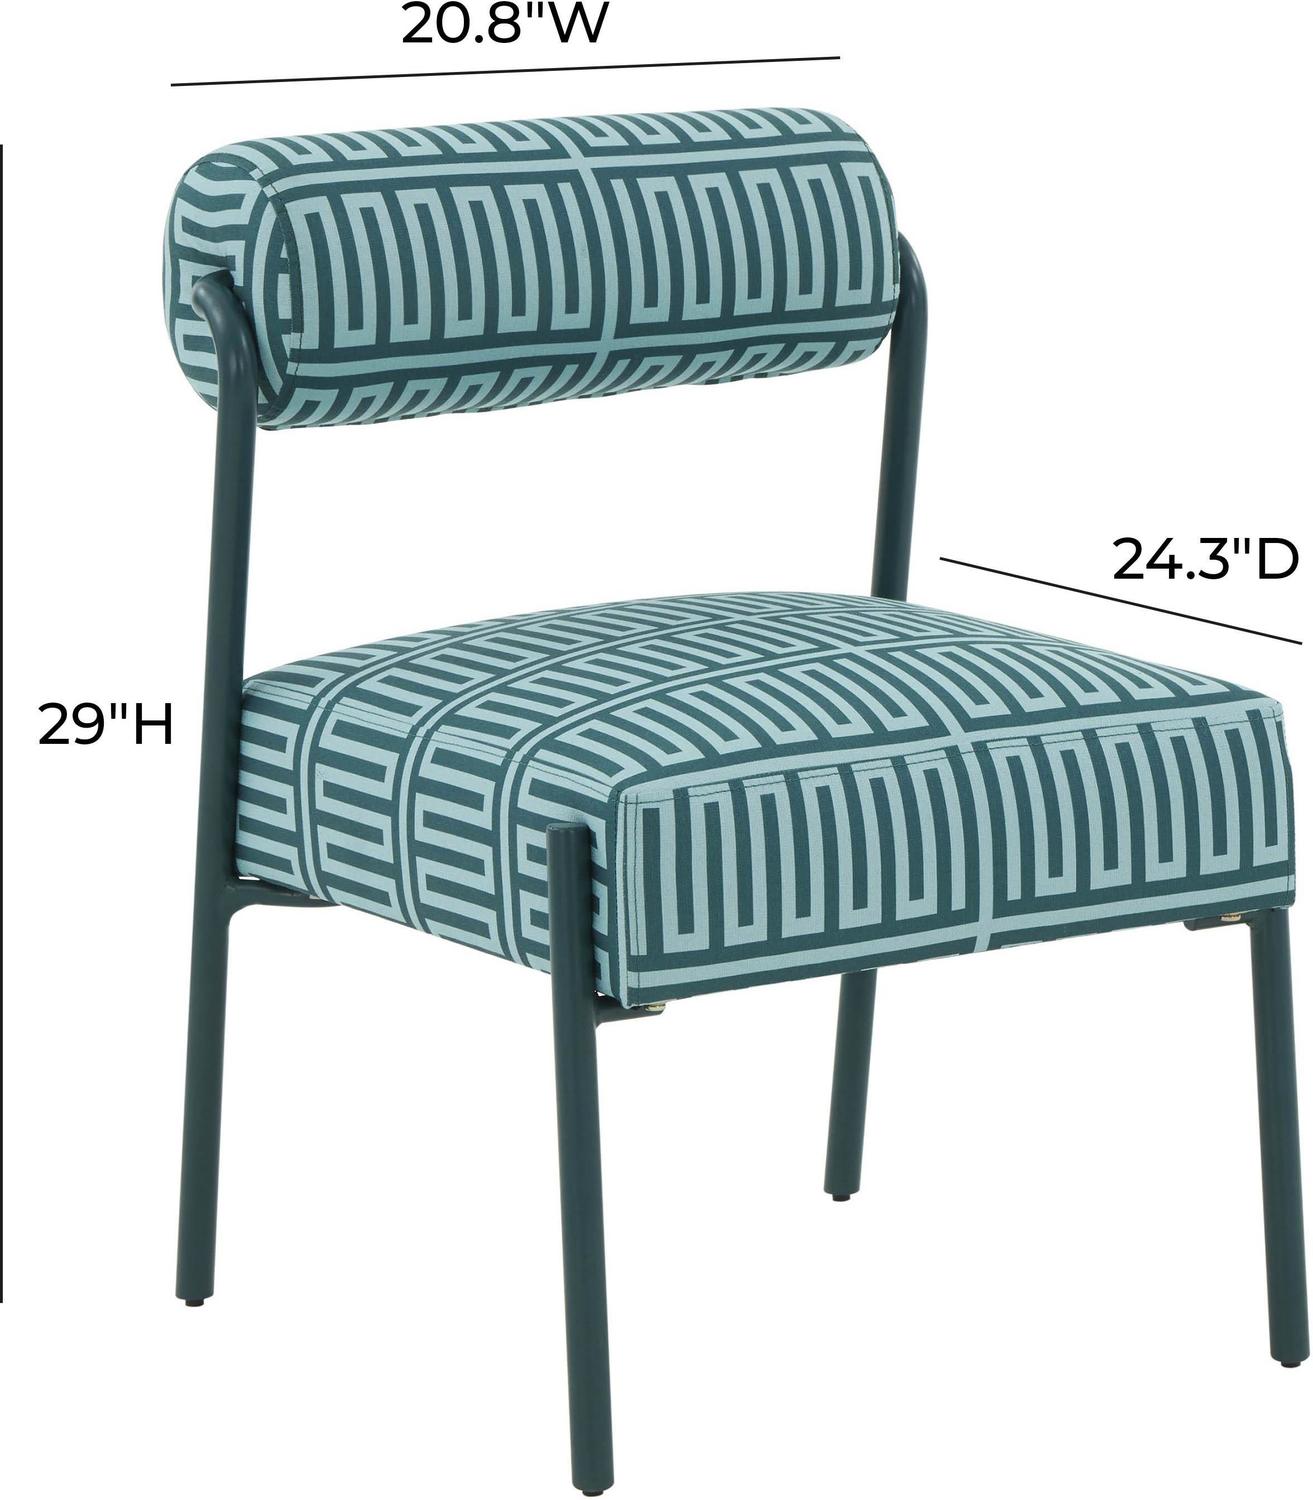 modern orange accent chair Contemporary Design Furniture Accent Chairs Green,Teal